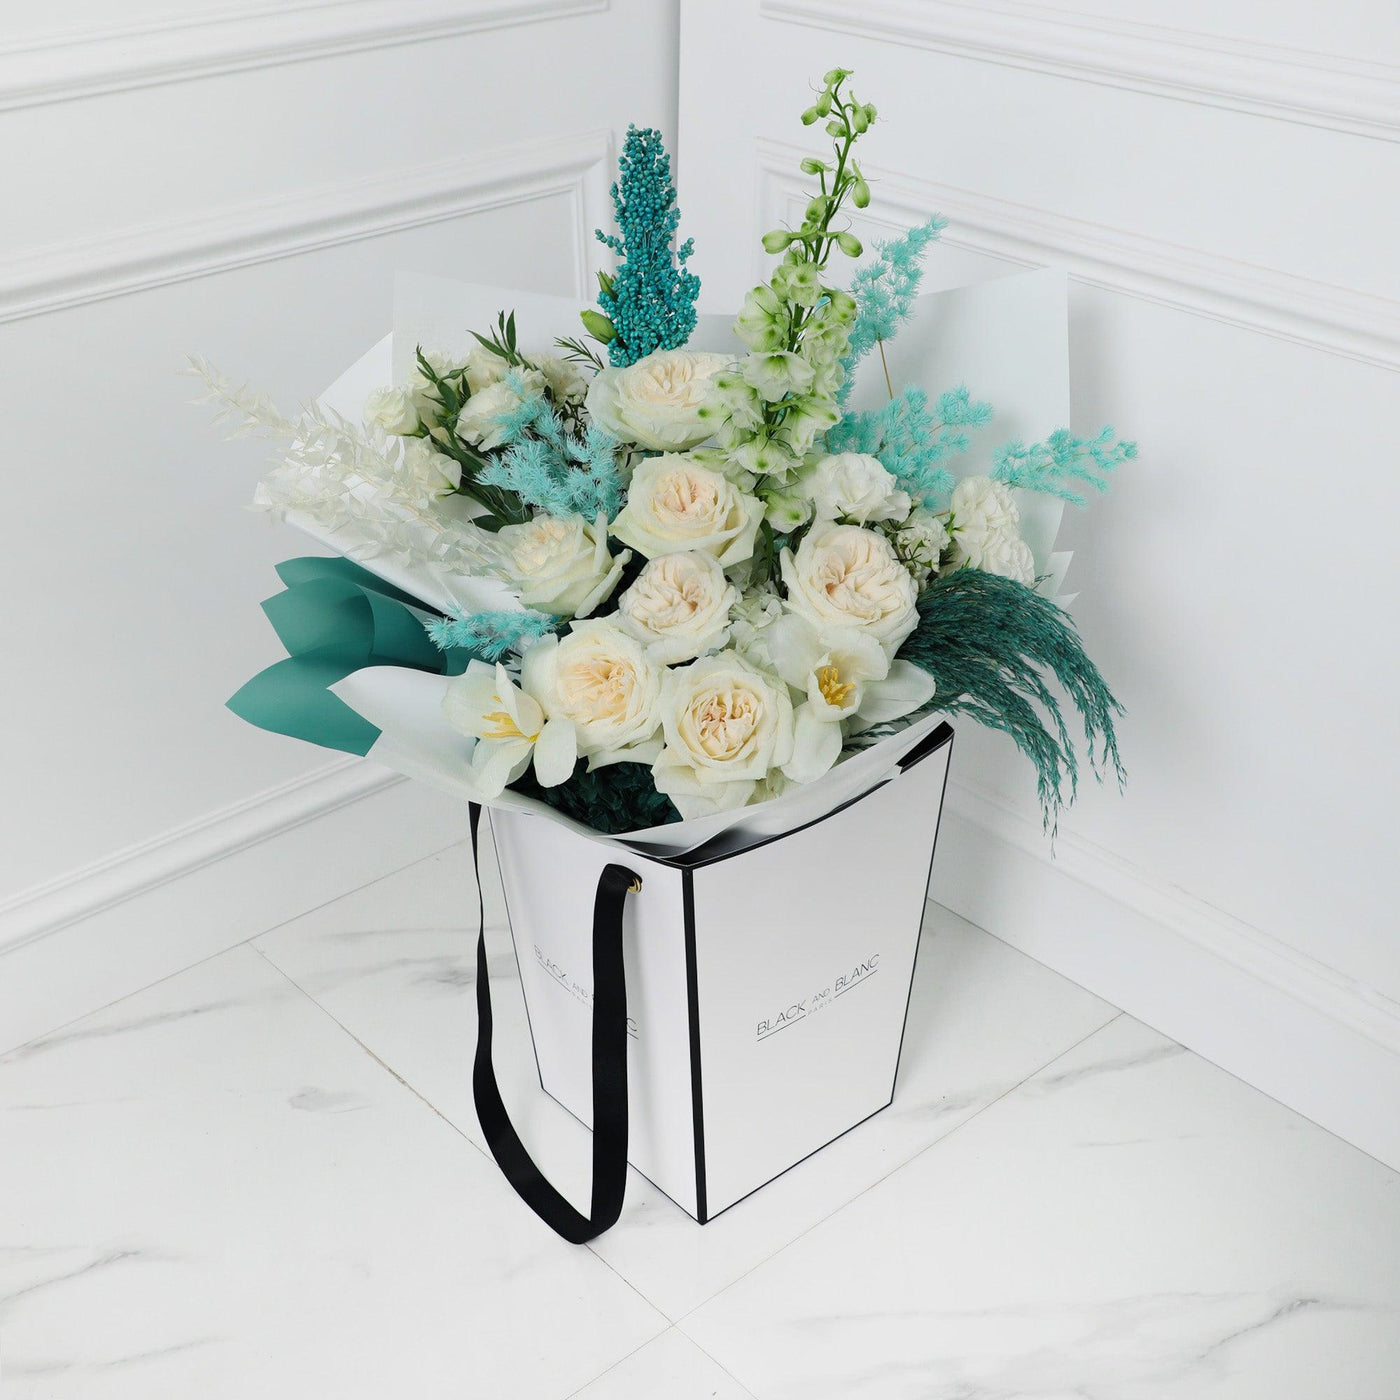 Breakfast at Tiffany's Bouqs - Fresh Flowers - BLACK AND BLANC